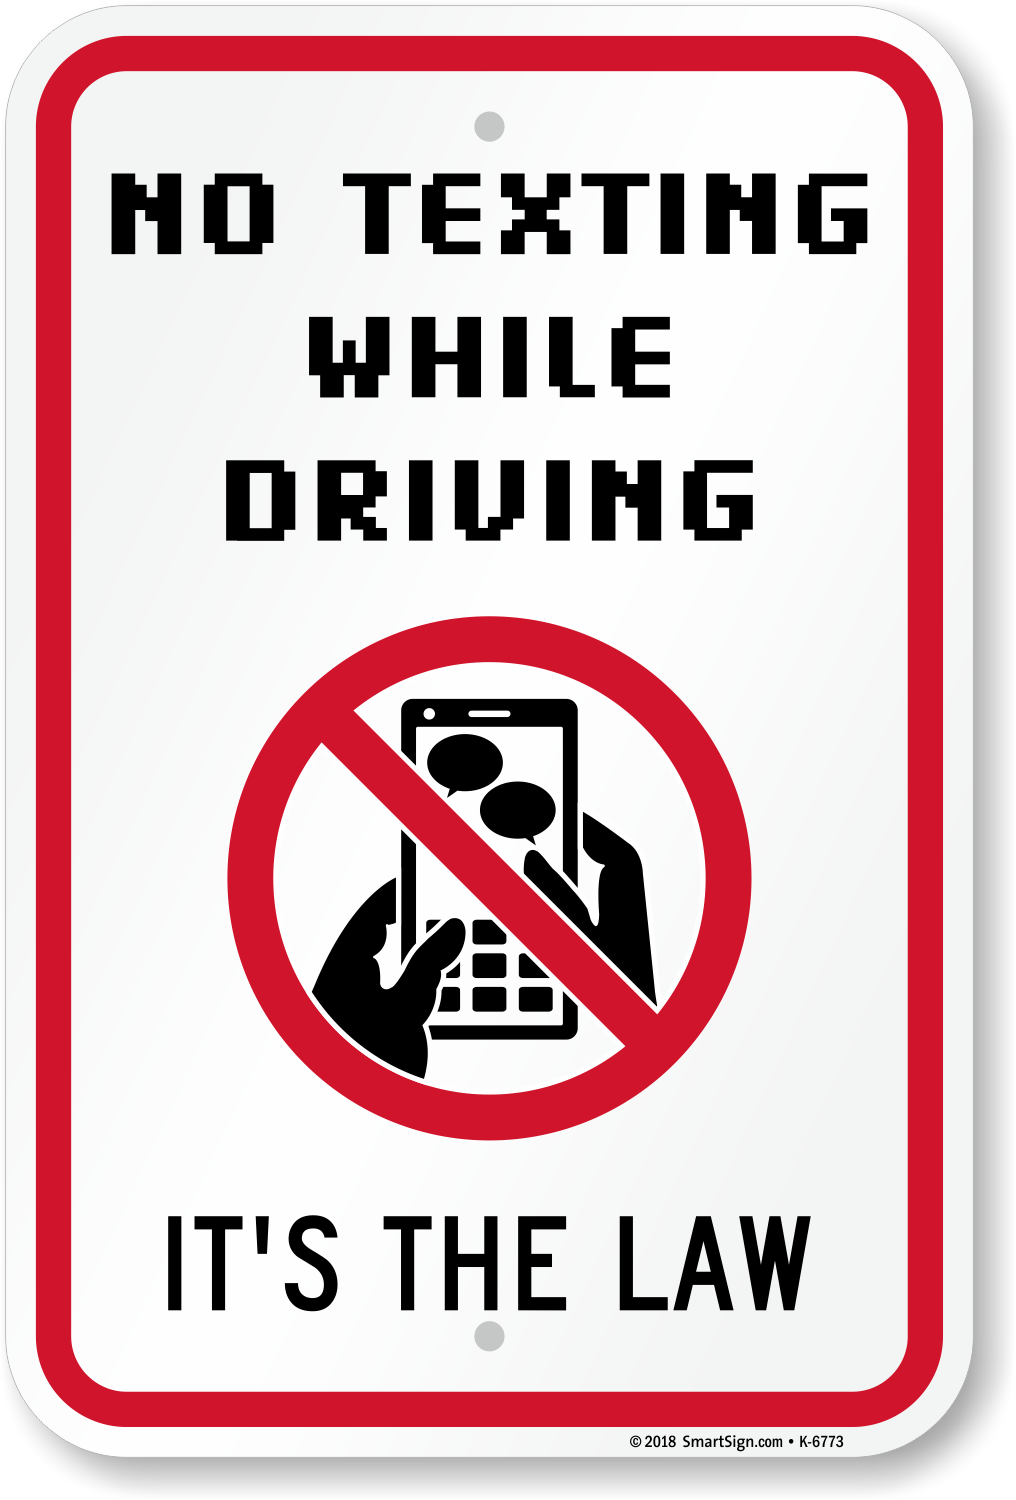 No Texting While Driving - Its The Law